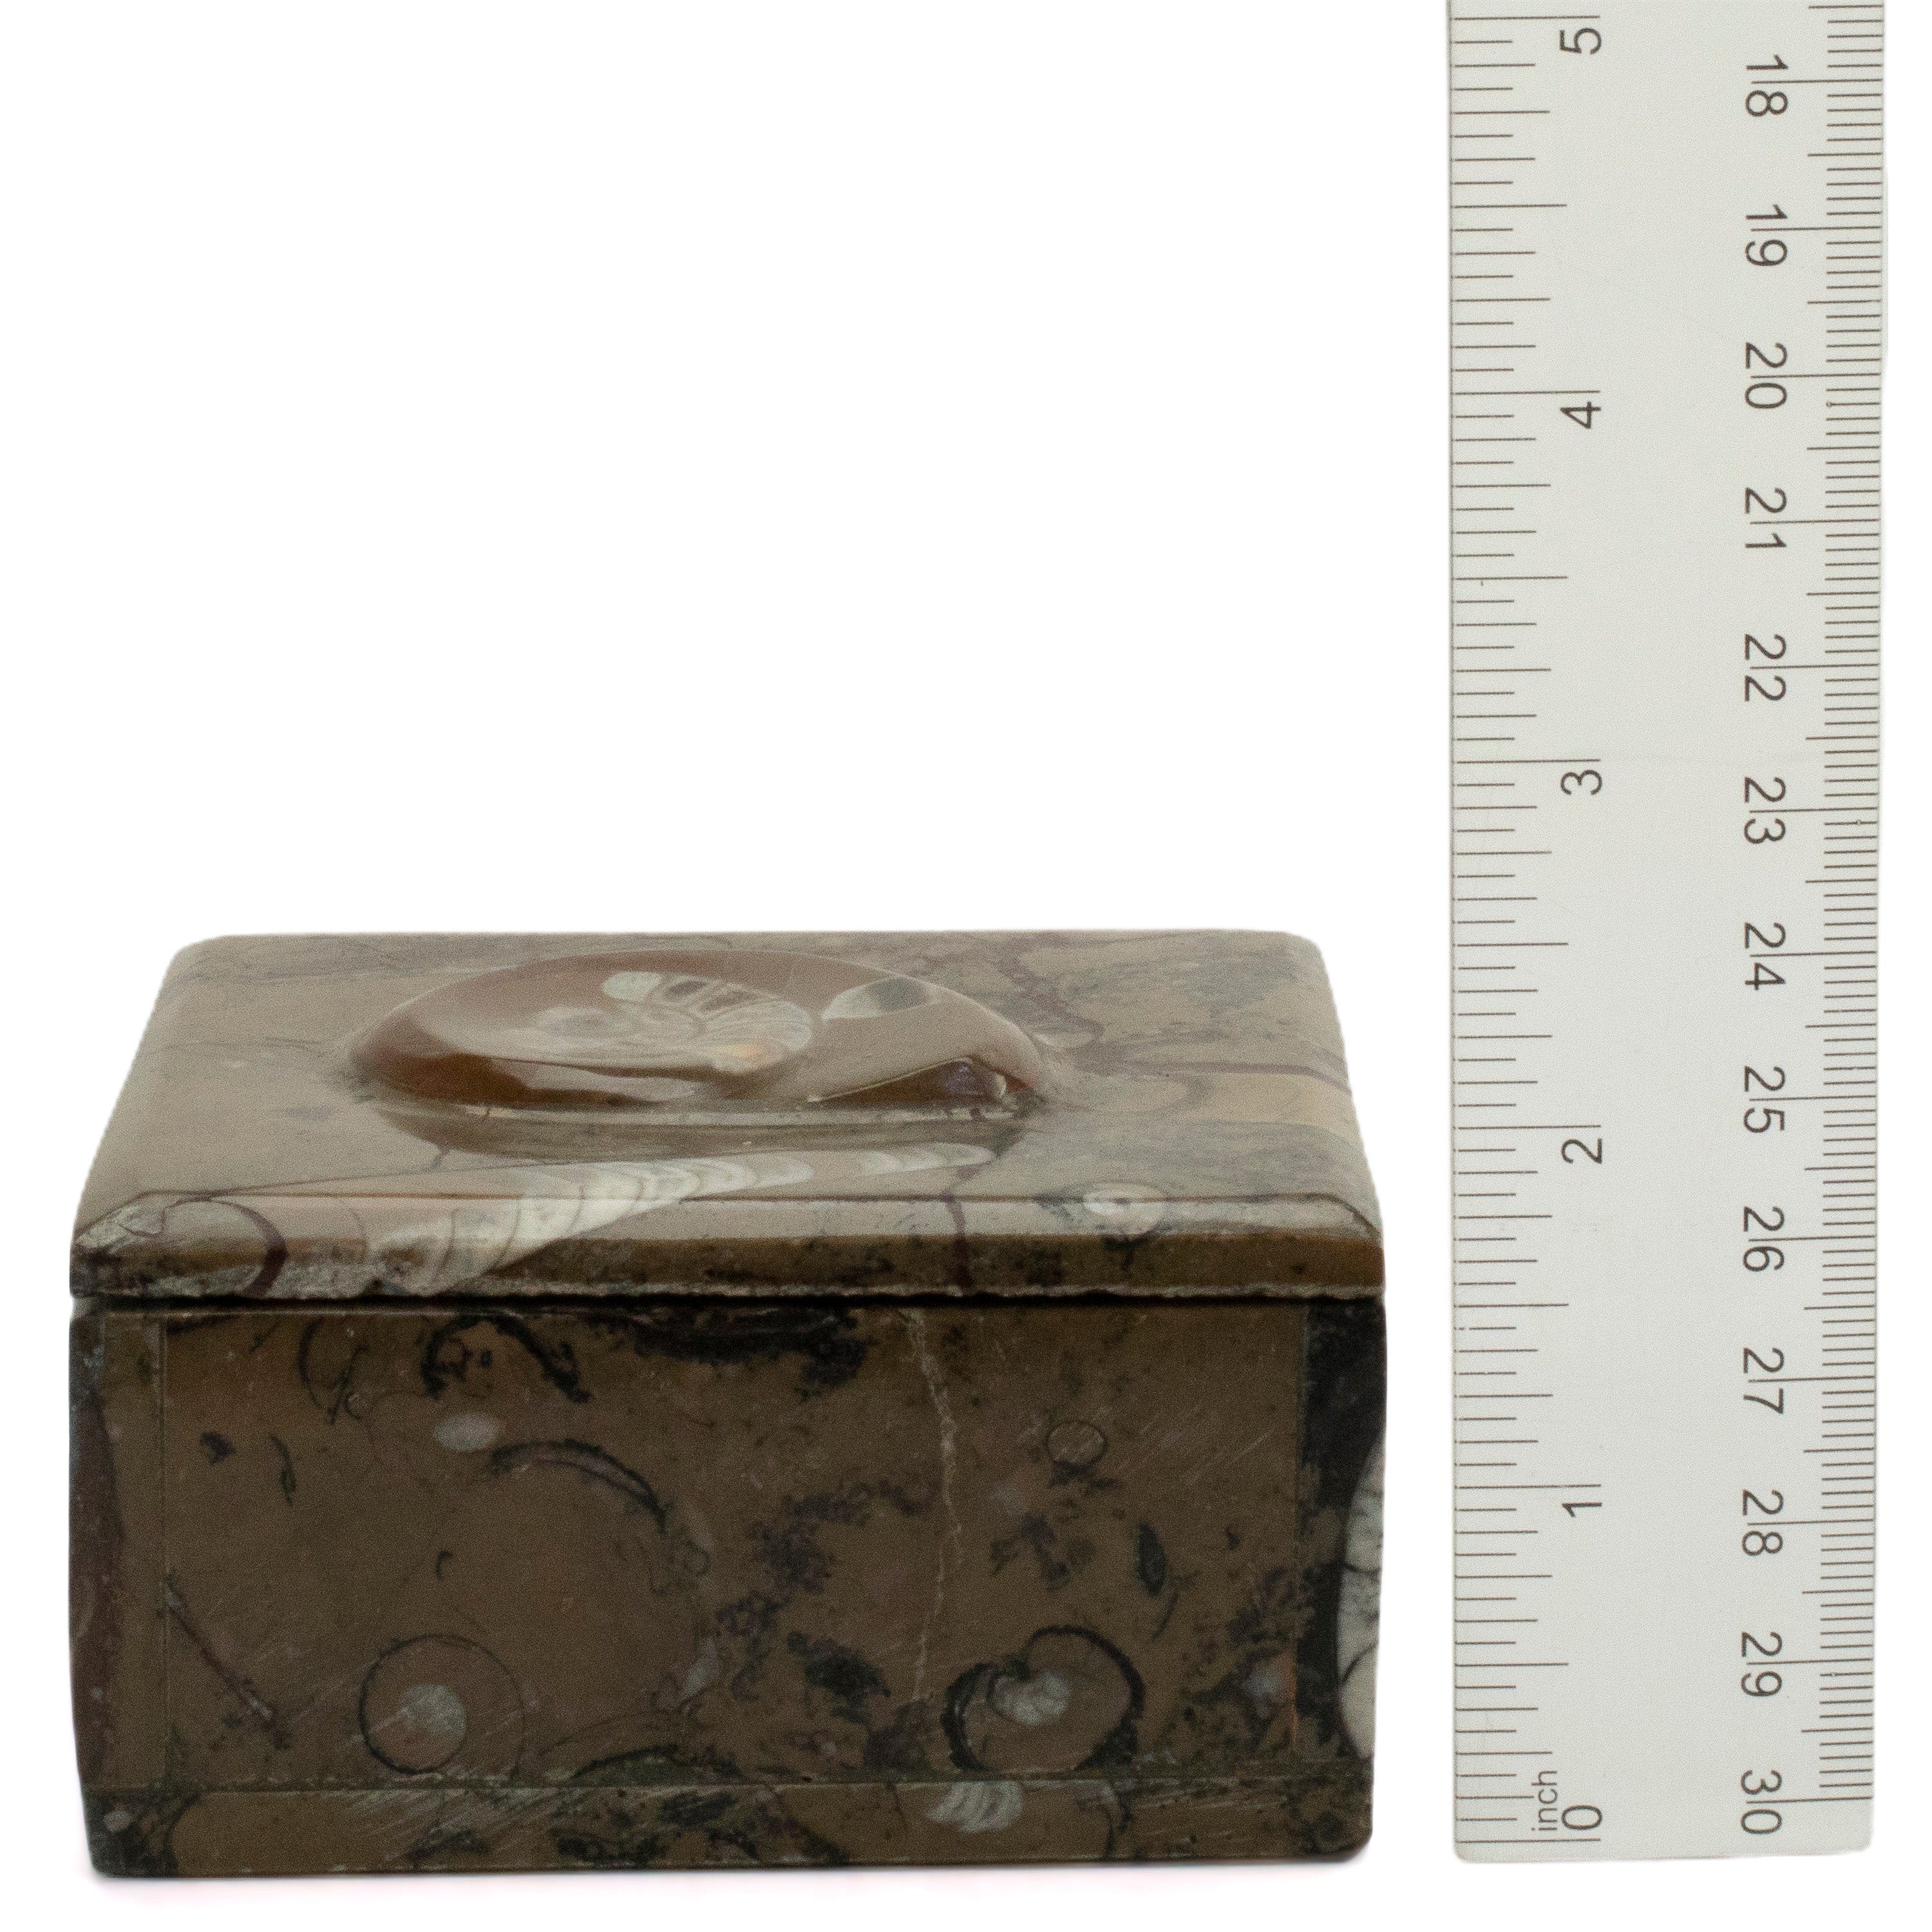 Kalifano Fossils & Minerals Natural Ammonite Vanity Box from Morocco - Square & Brown SVA-AMM-BN1